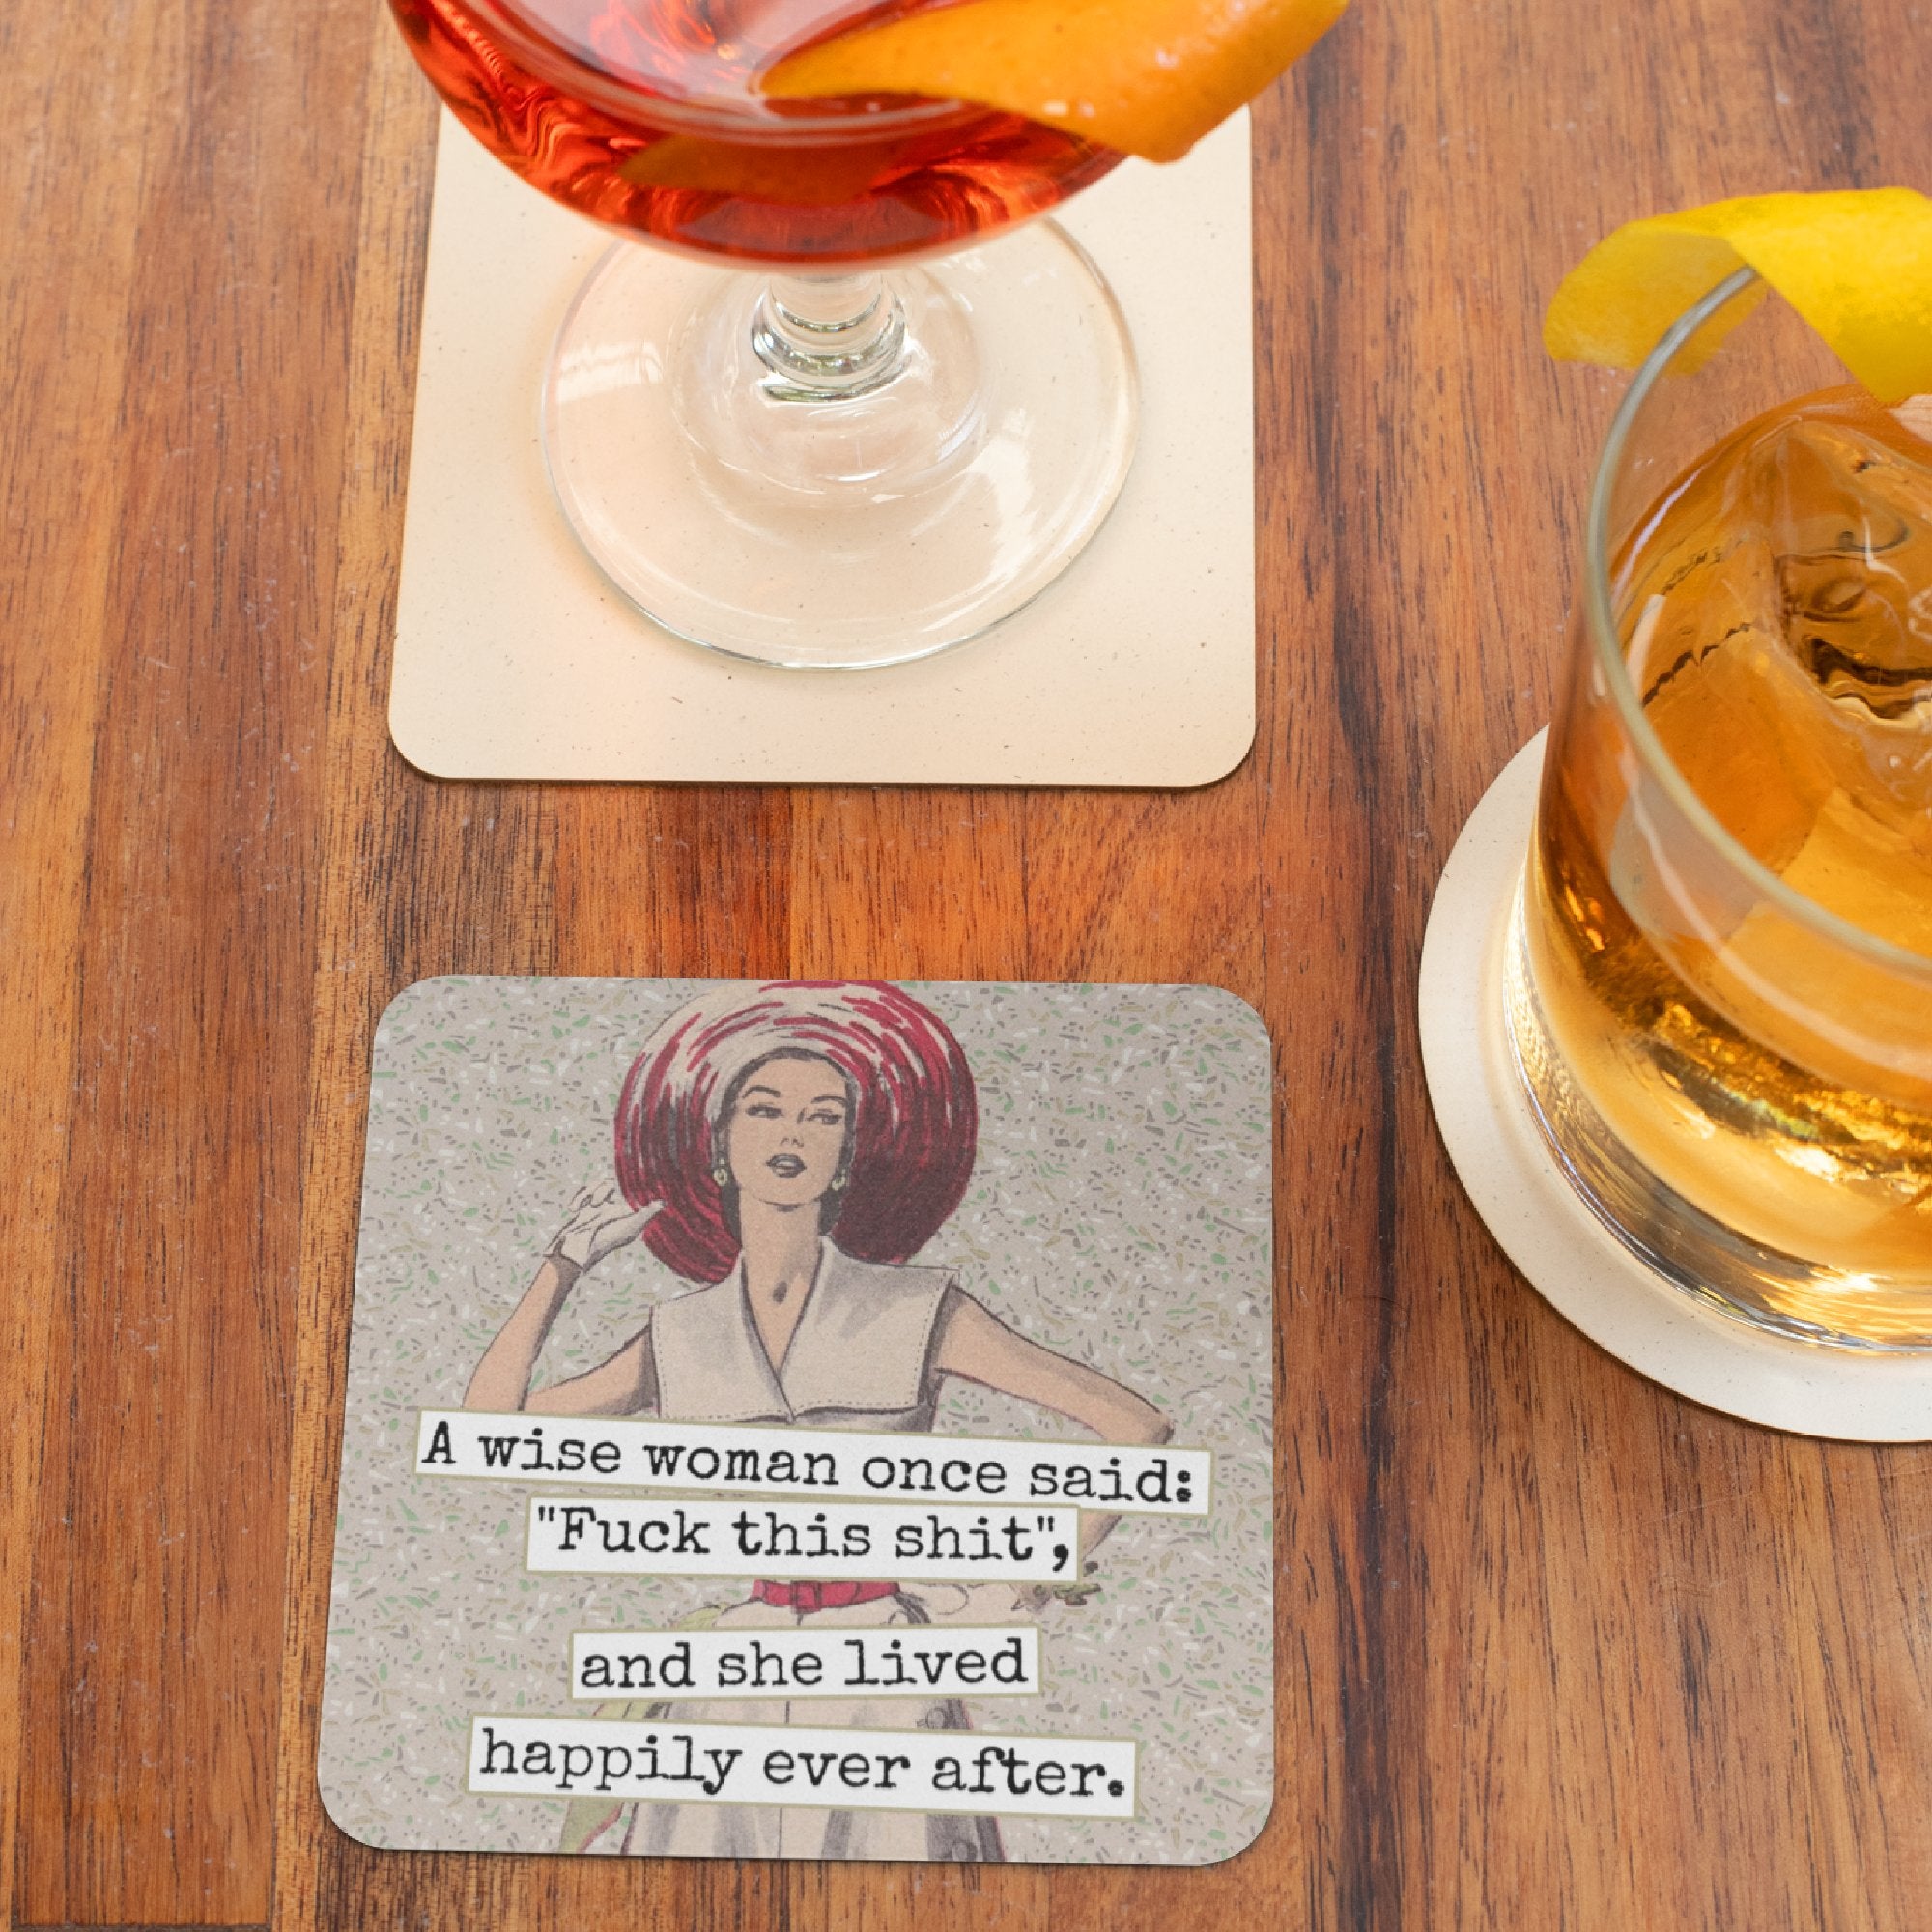 COASTER. A Wise Woman Once Said: "Fuck This Shit"... - My Filosophy